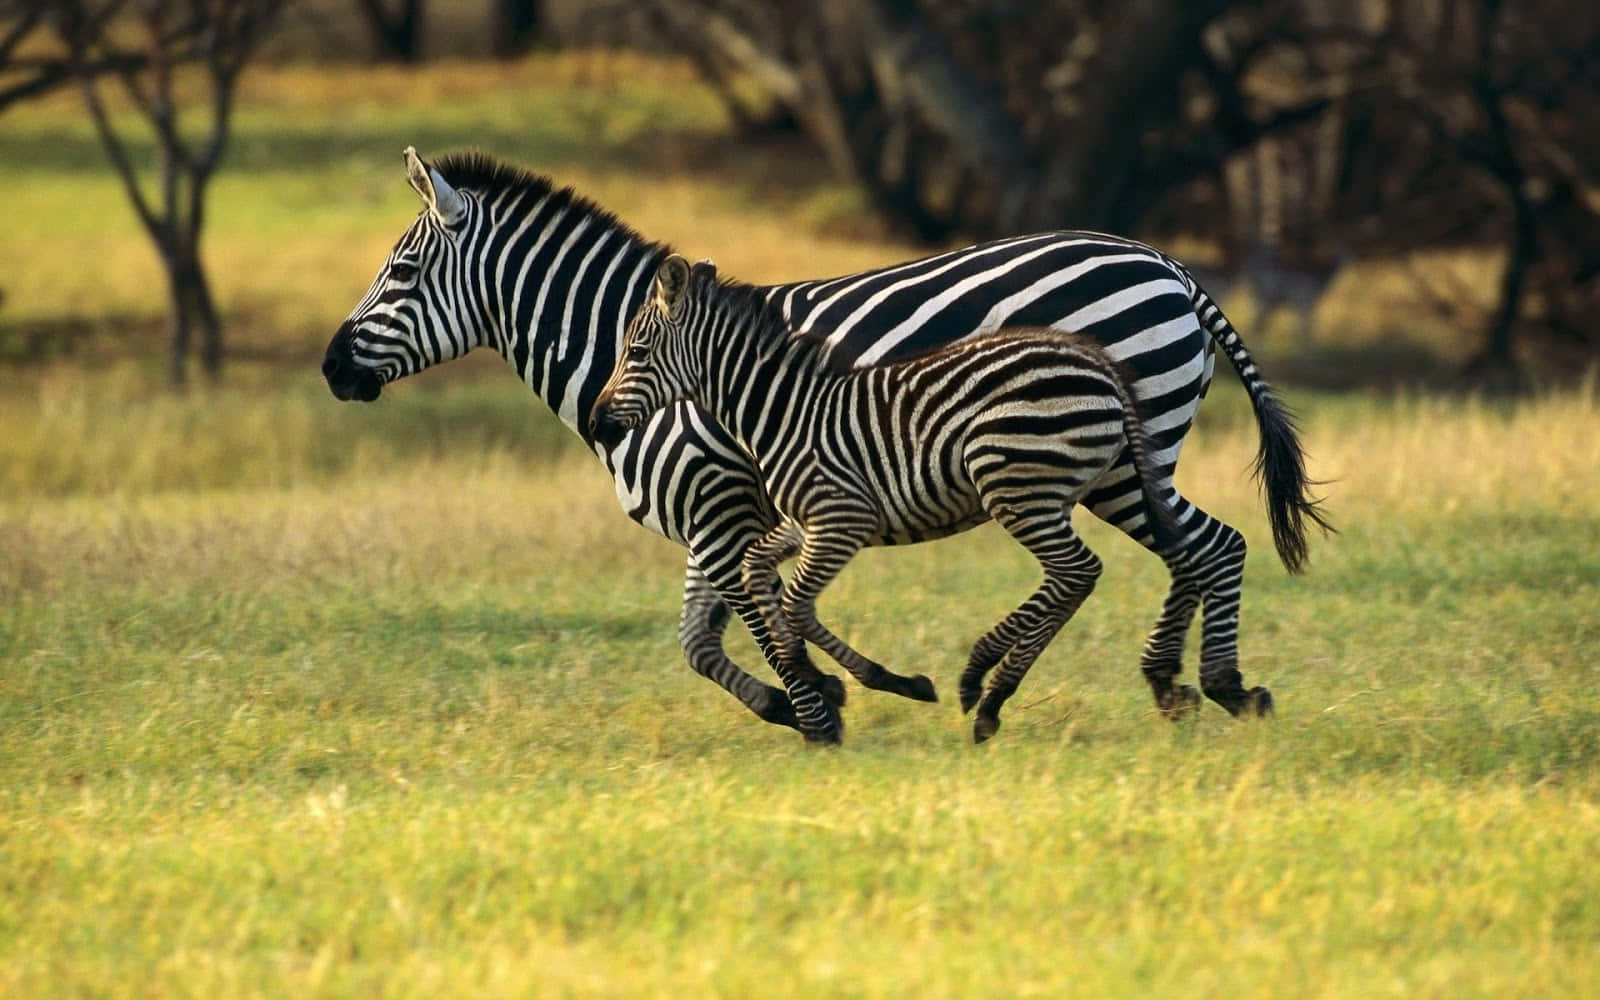 A study of the iconic black and white stripes of the Zebra